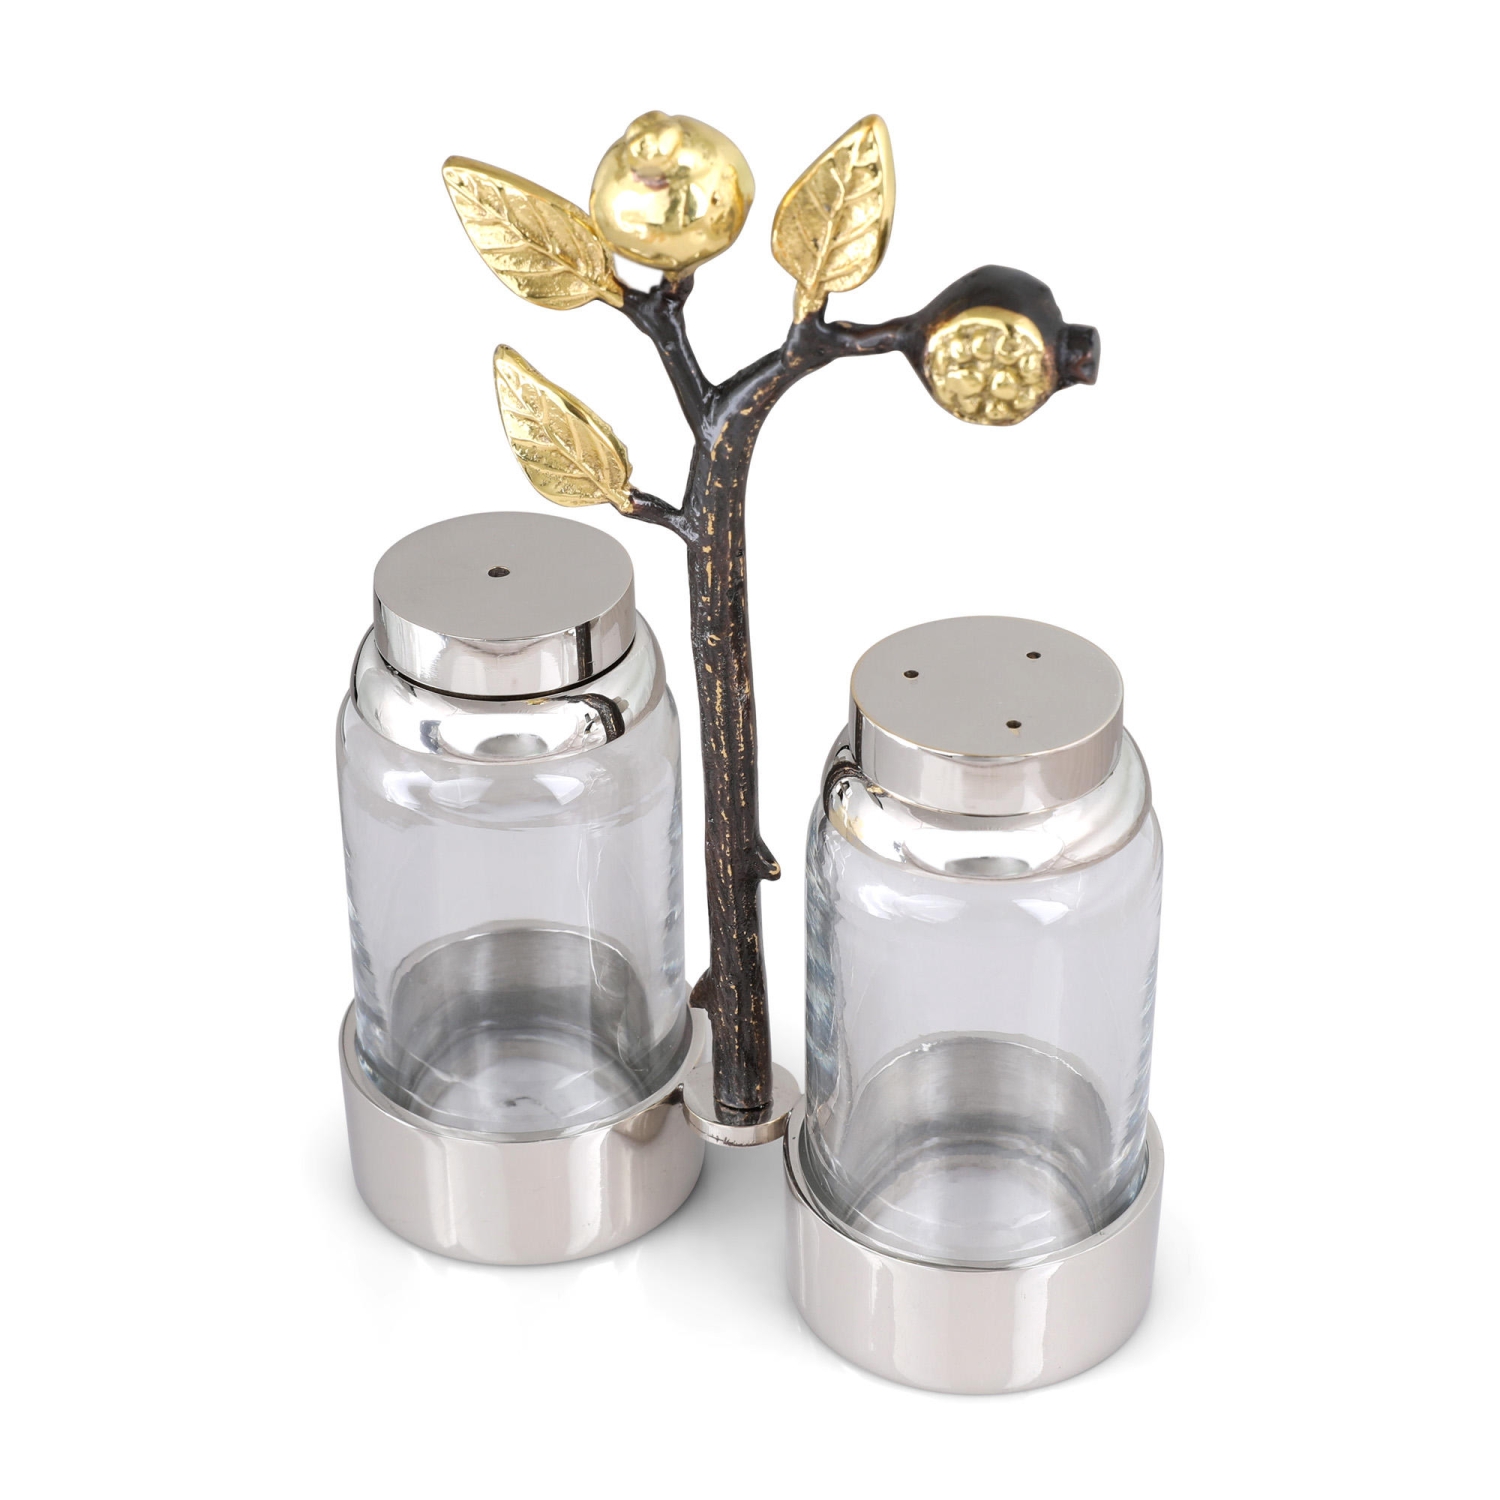 Yair Emanuel Glass Salt and Pepper Pots in Pomegranate Stand - 1